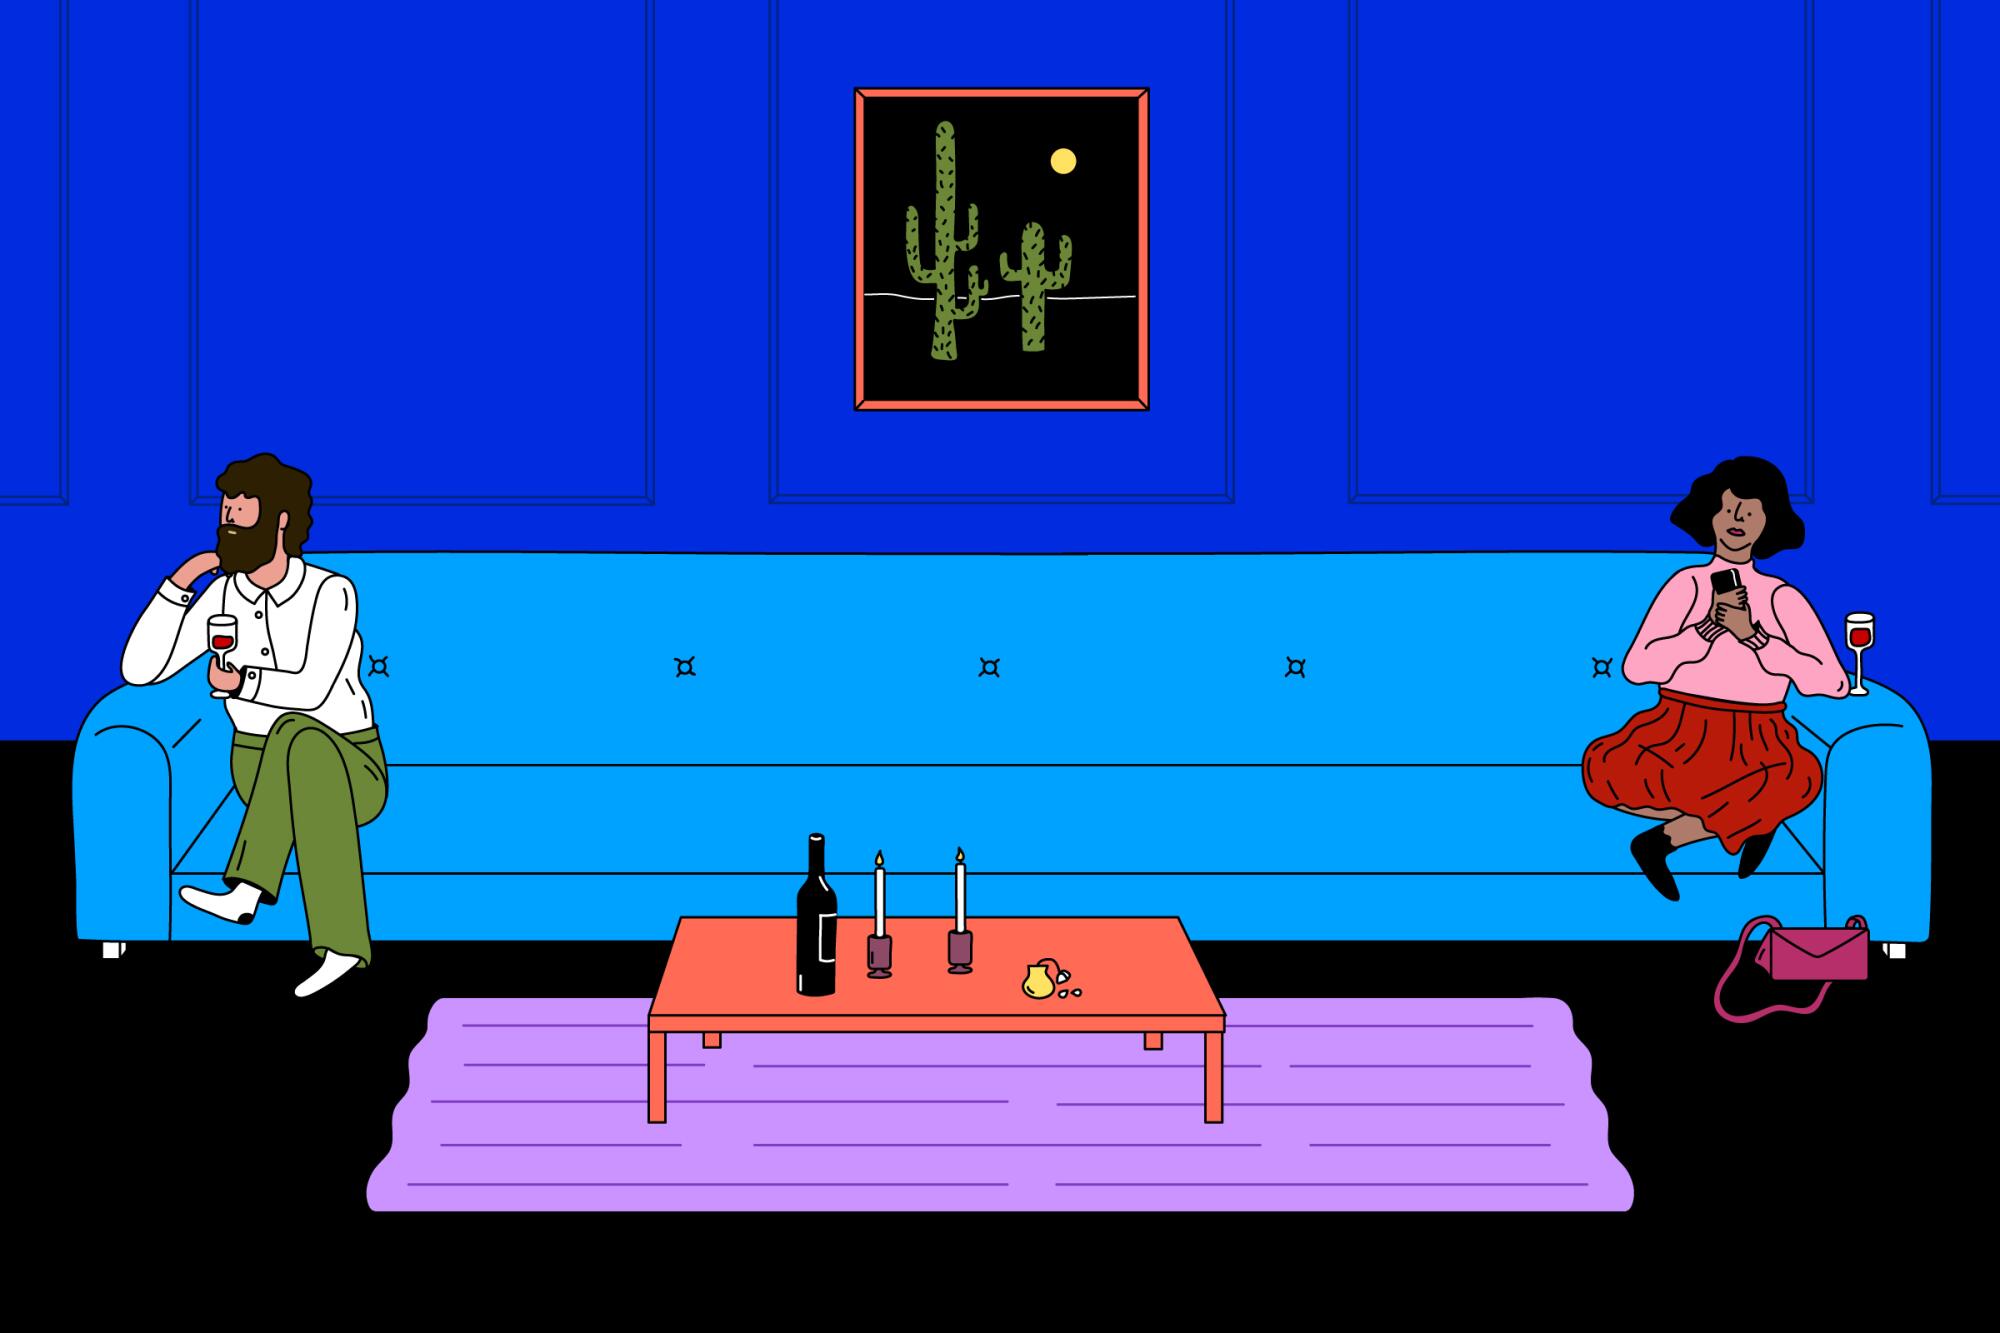 Man and woman on a date sit on the far ends of a long blue couch against a dark blue wall with a cactus painting.